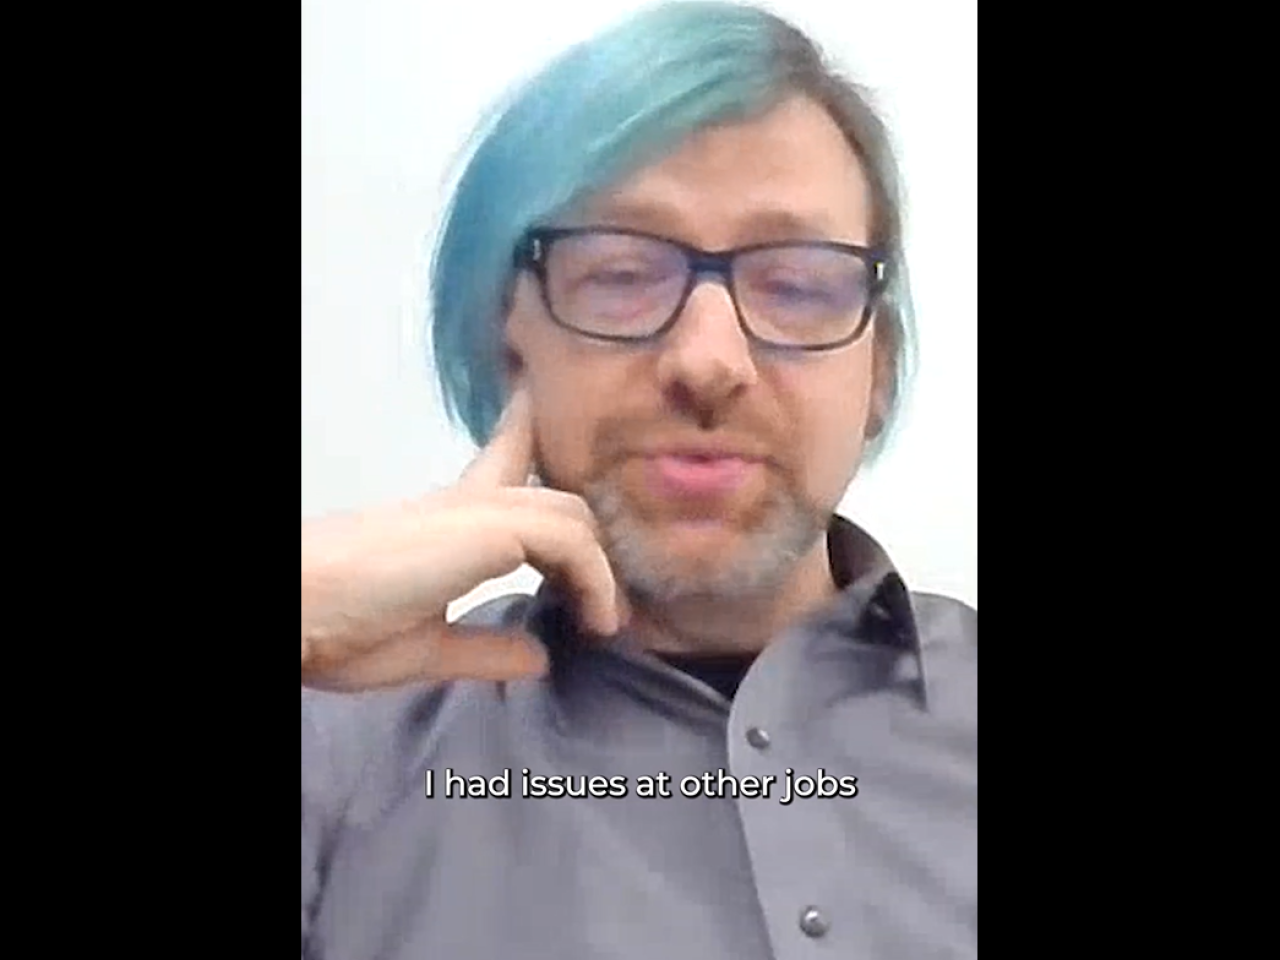 A person in glasses and a streak of light blue hair in a virtual meeting. "I had issues at other jobs."